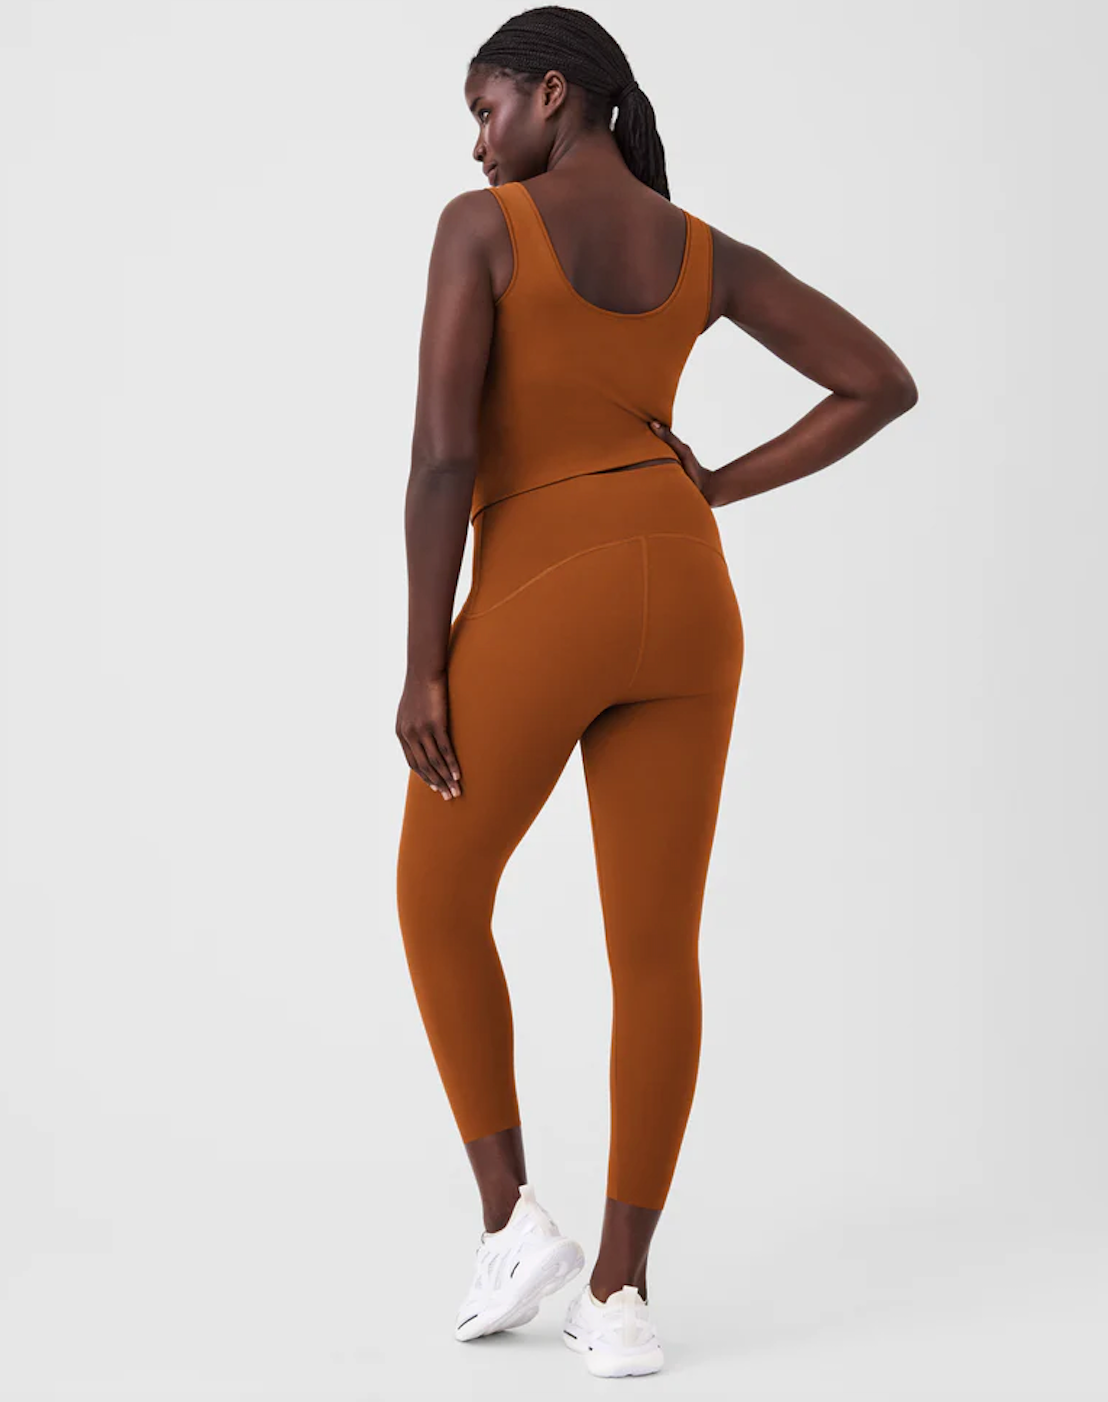 SPANX BOOTY BOOST ACTIVE 7/8 LEGGINGS IN BUTTERSCOTCH | ShopIDB.com -  Indigeaux Denim Bar & Boutique